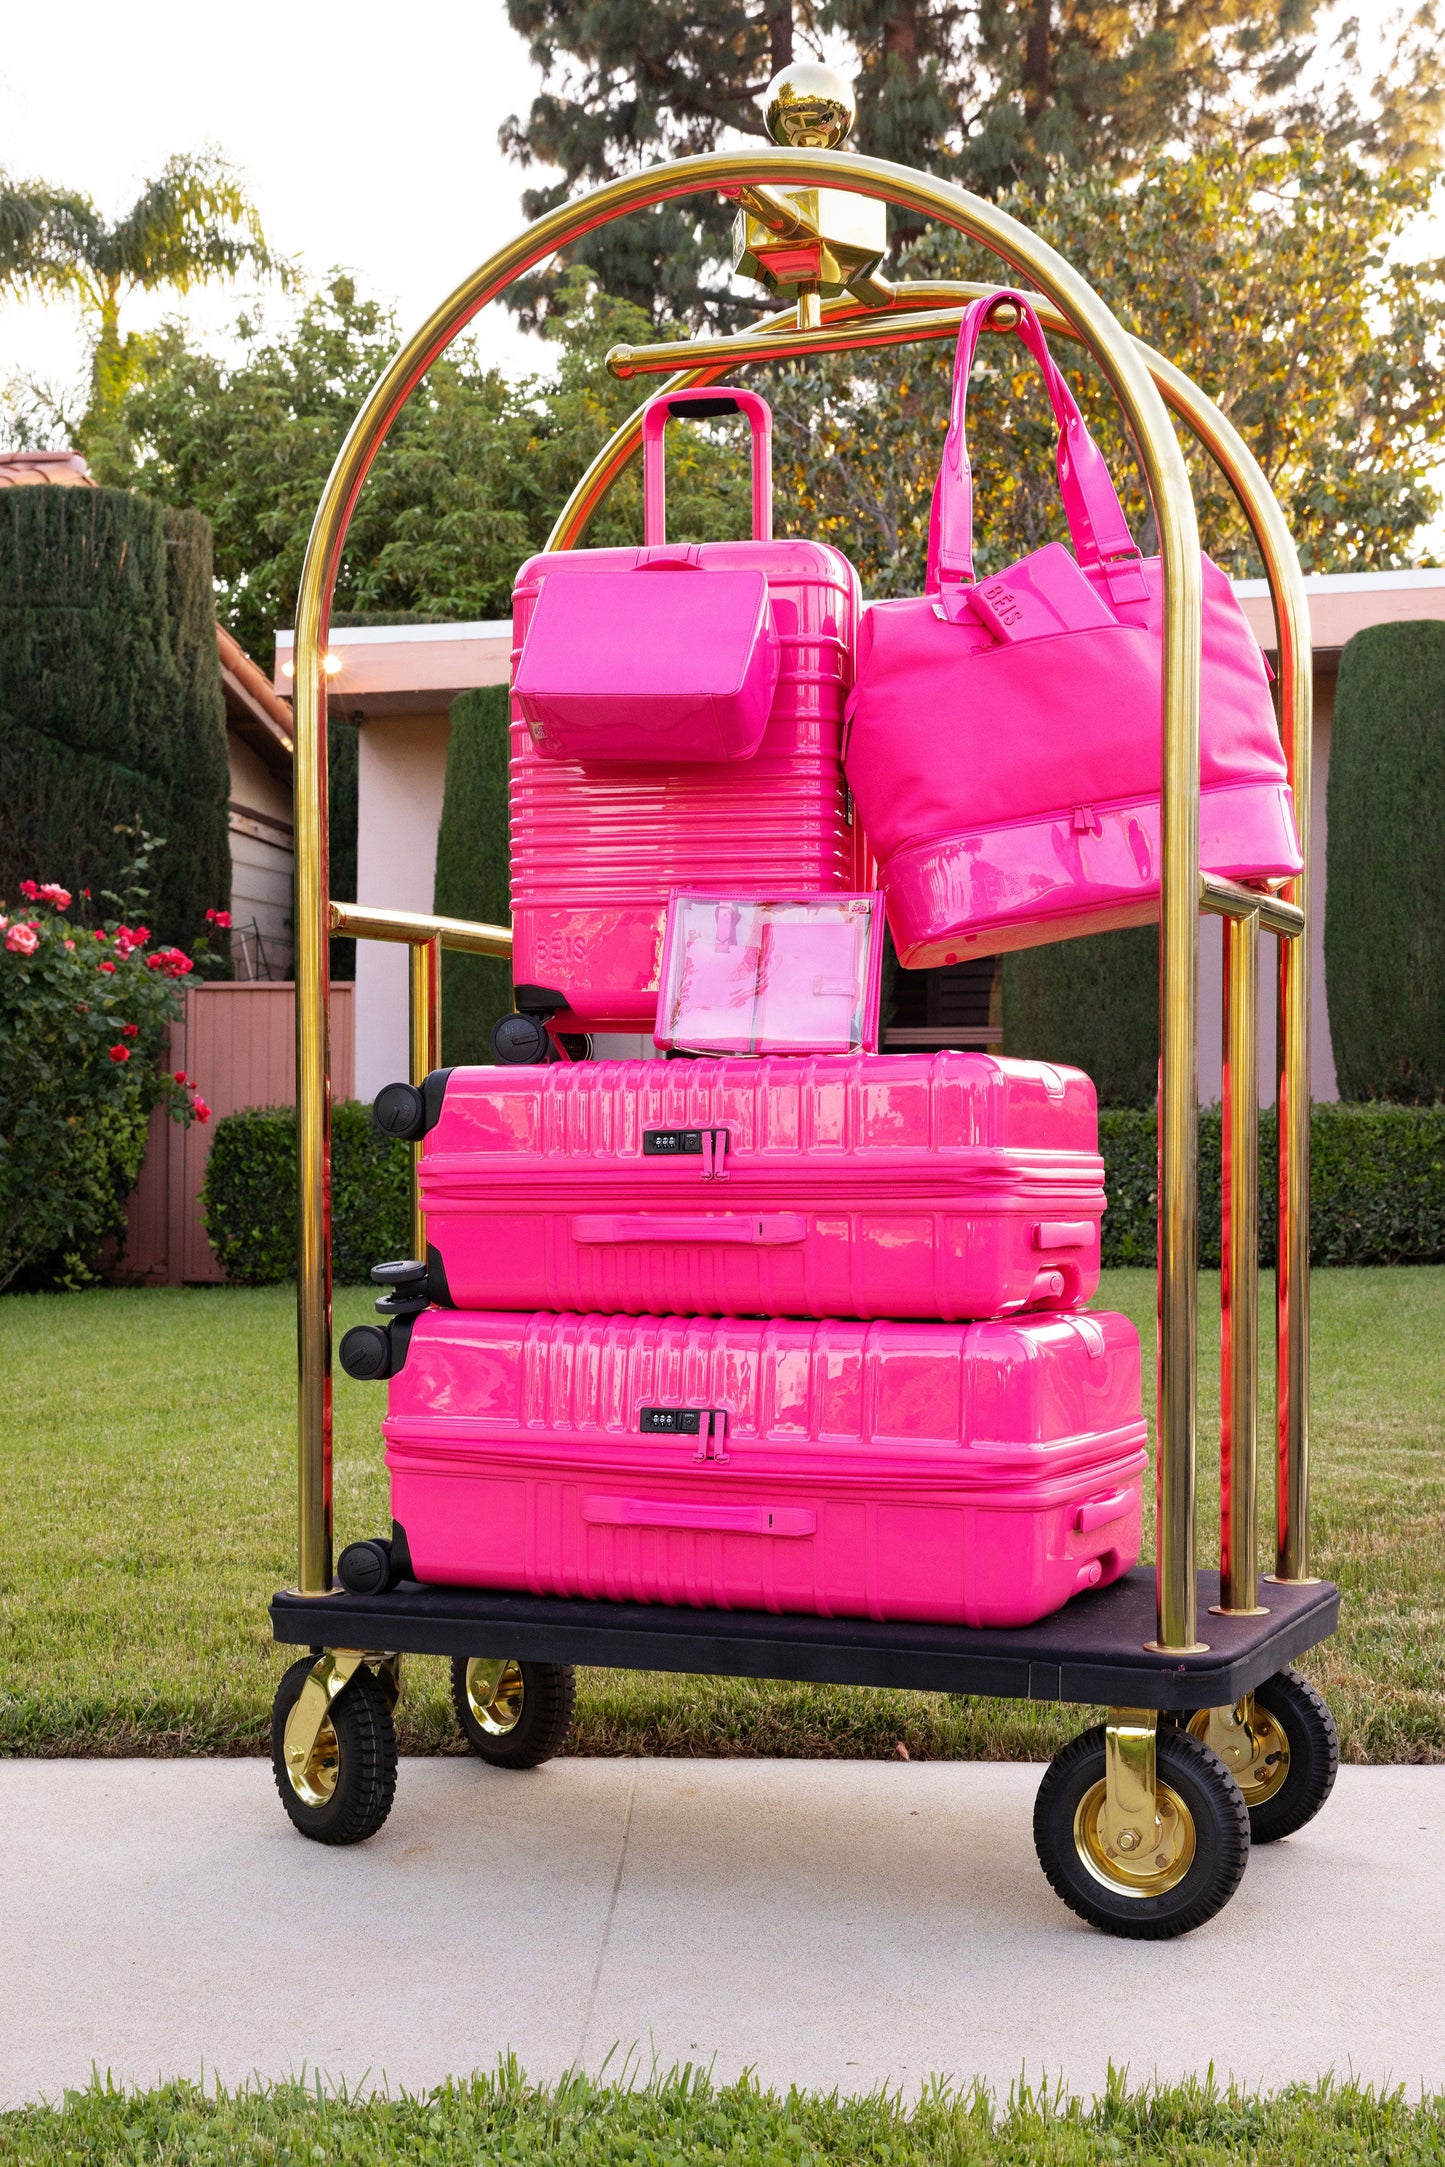 The Medium Check-in Roller in Barbie™ Pink